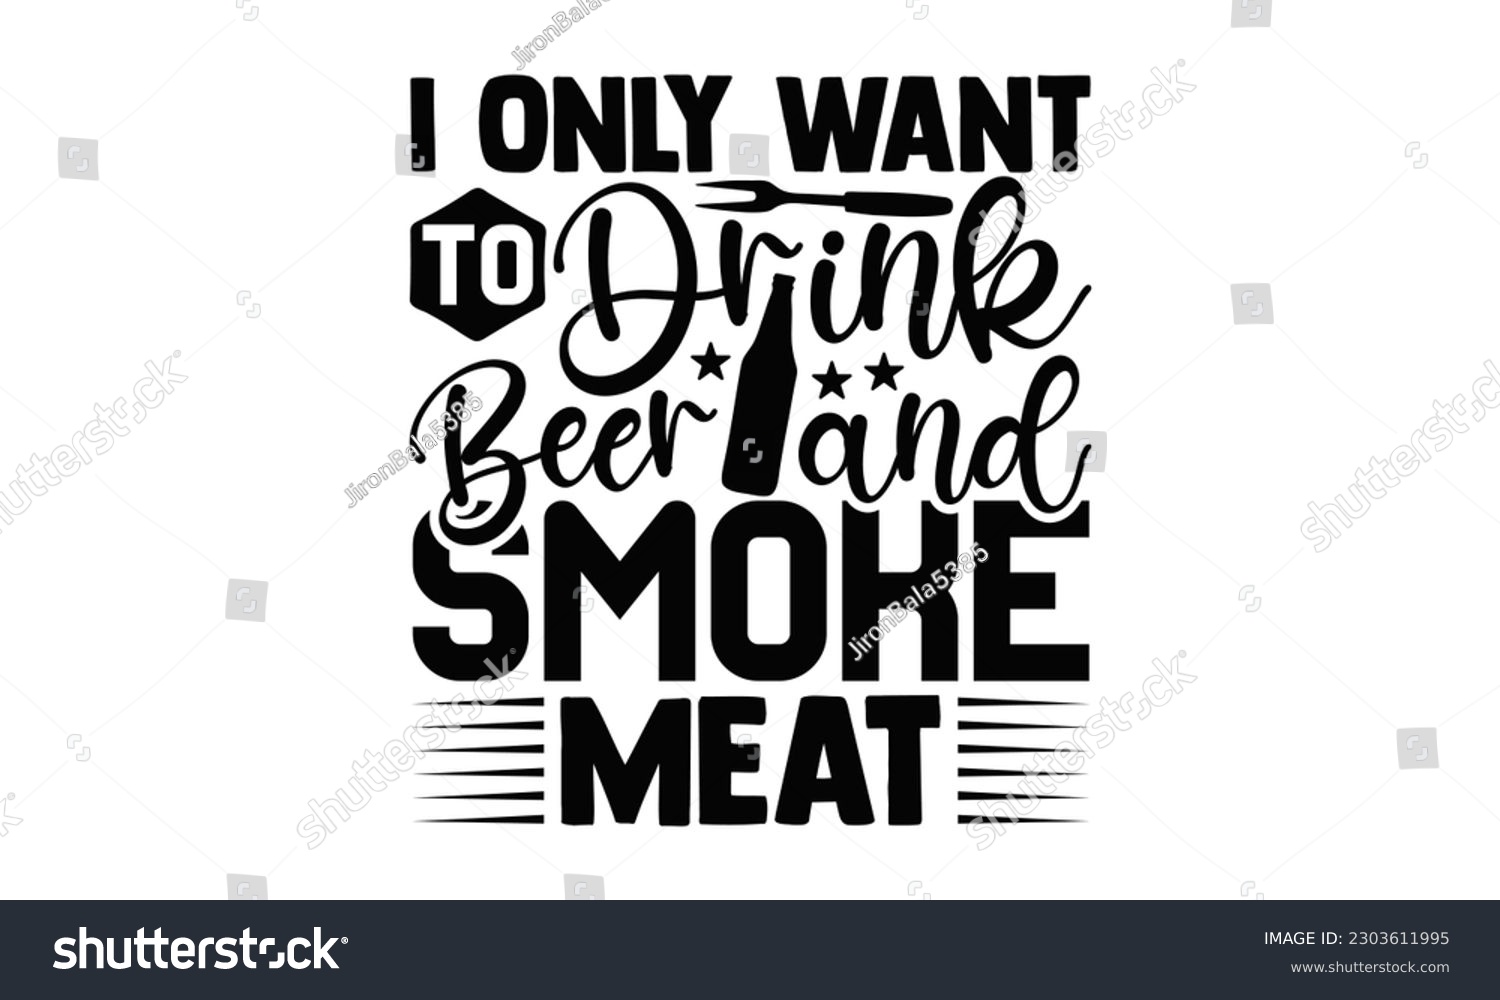 SVG of I Only Want To Drink Beer And Smoke Meat - Barbecue SVG Design, Hand drawn vintage illustration with hand-lettering and decoration elements with, SVG Files for Cutting.
 svg